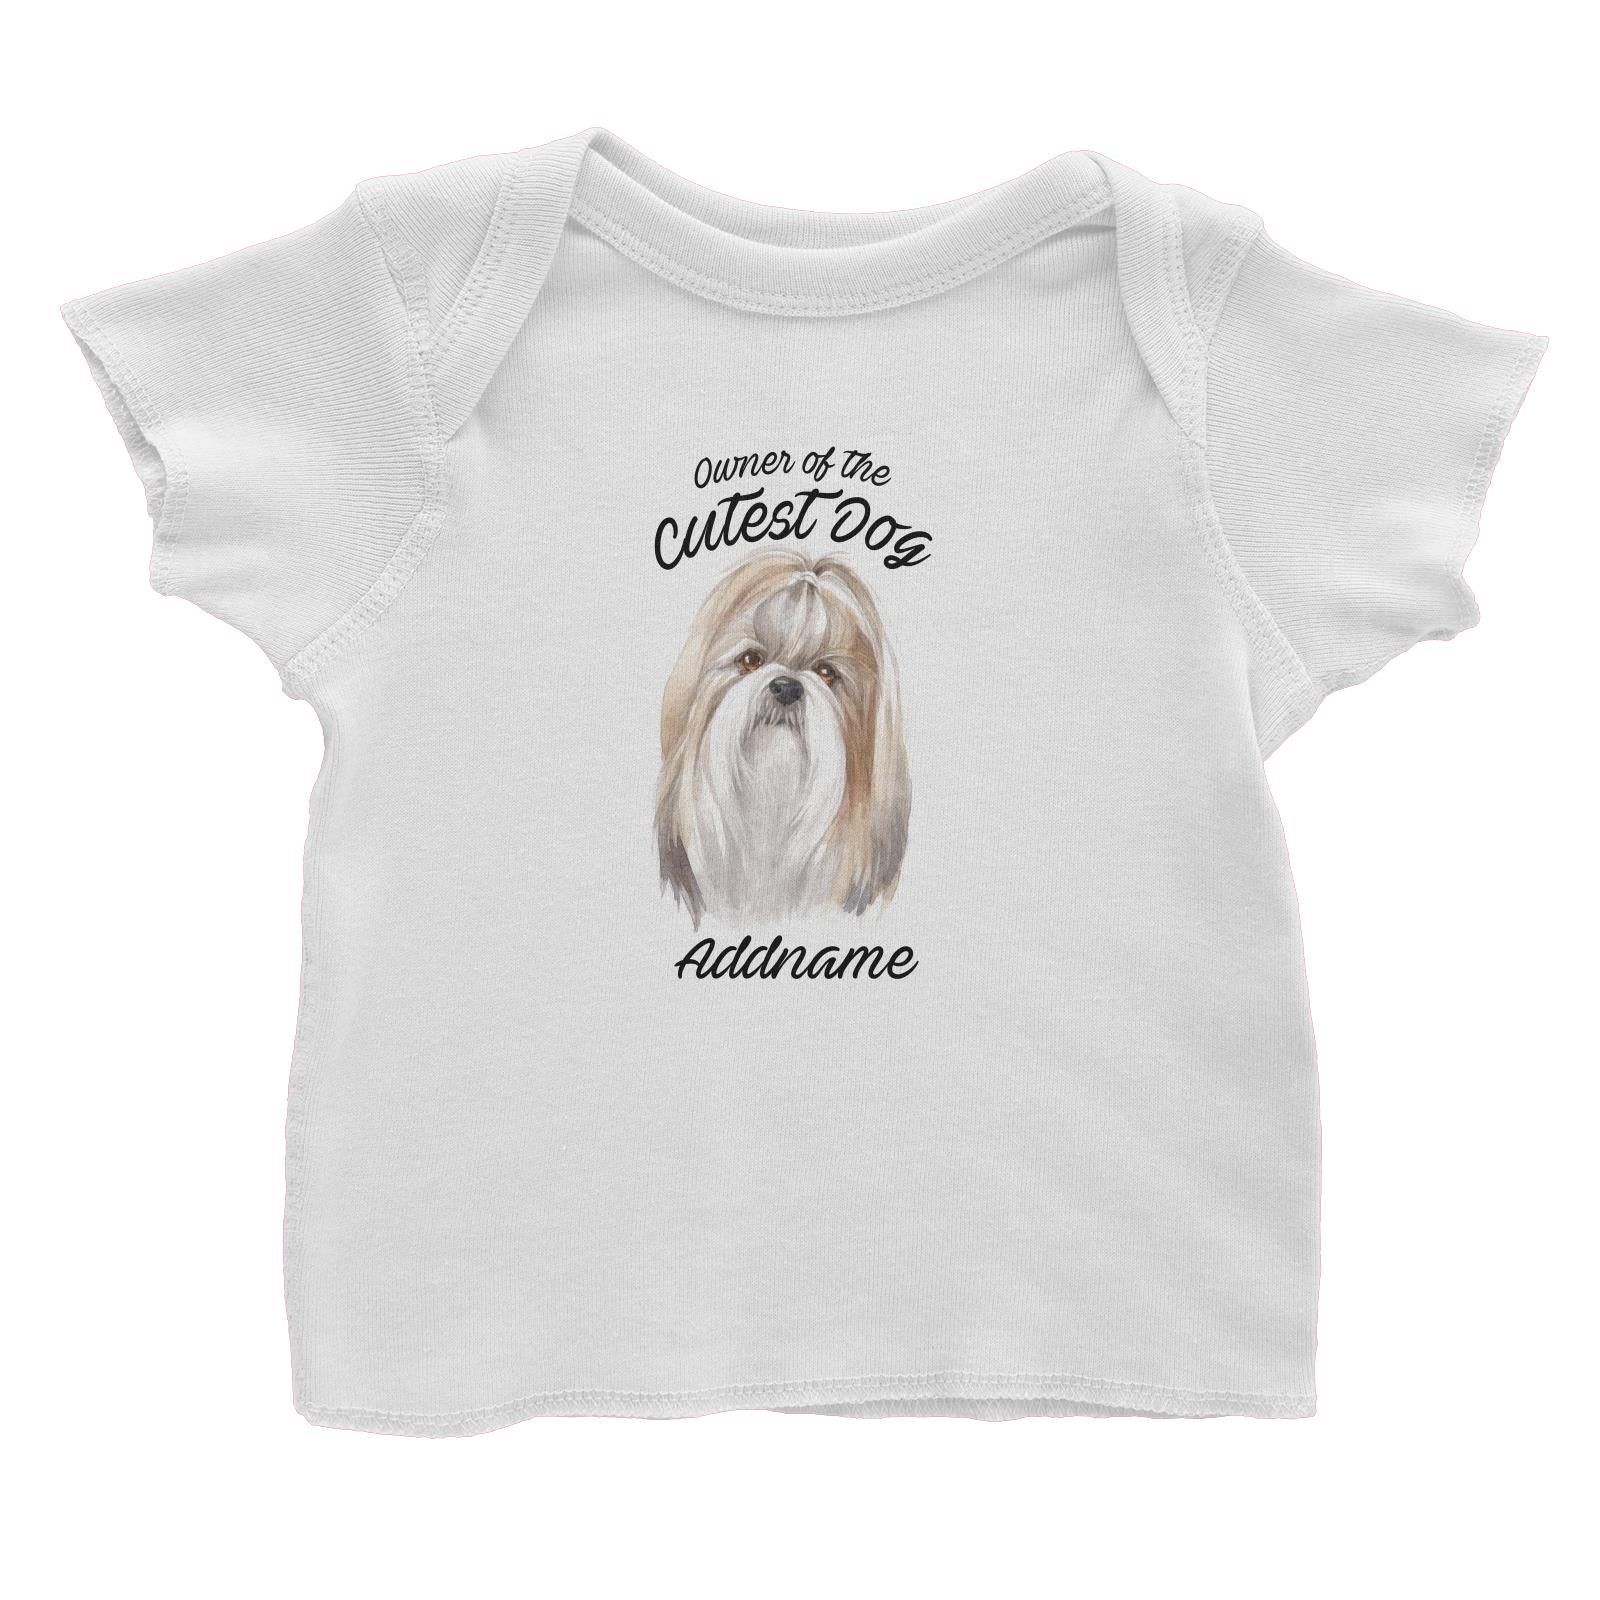 Watercolor Dog Owner Of The Cutest Dog Shih Tzu Addname Baby T-Shirt